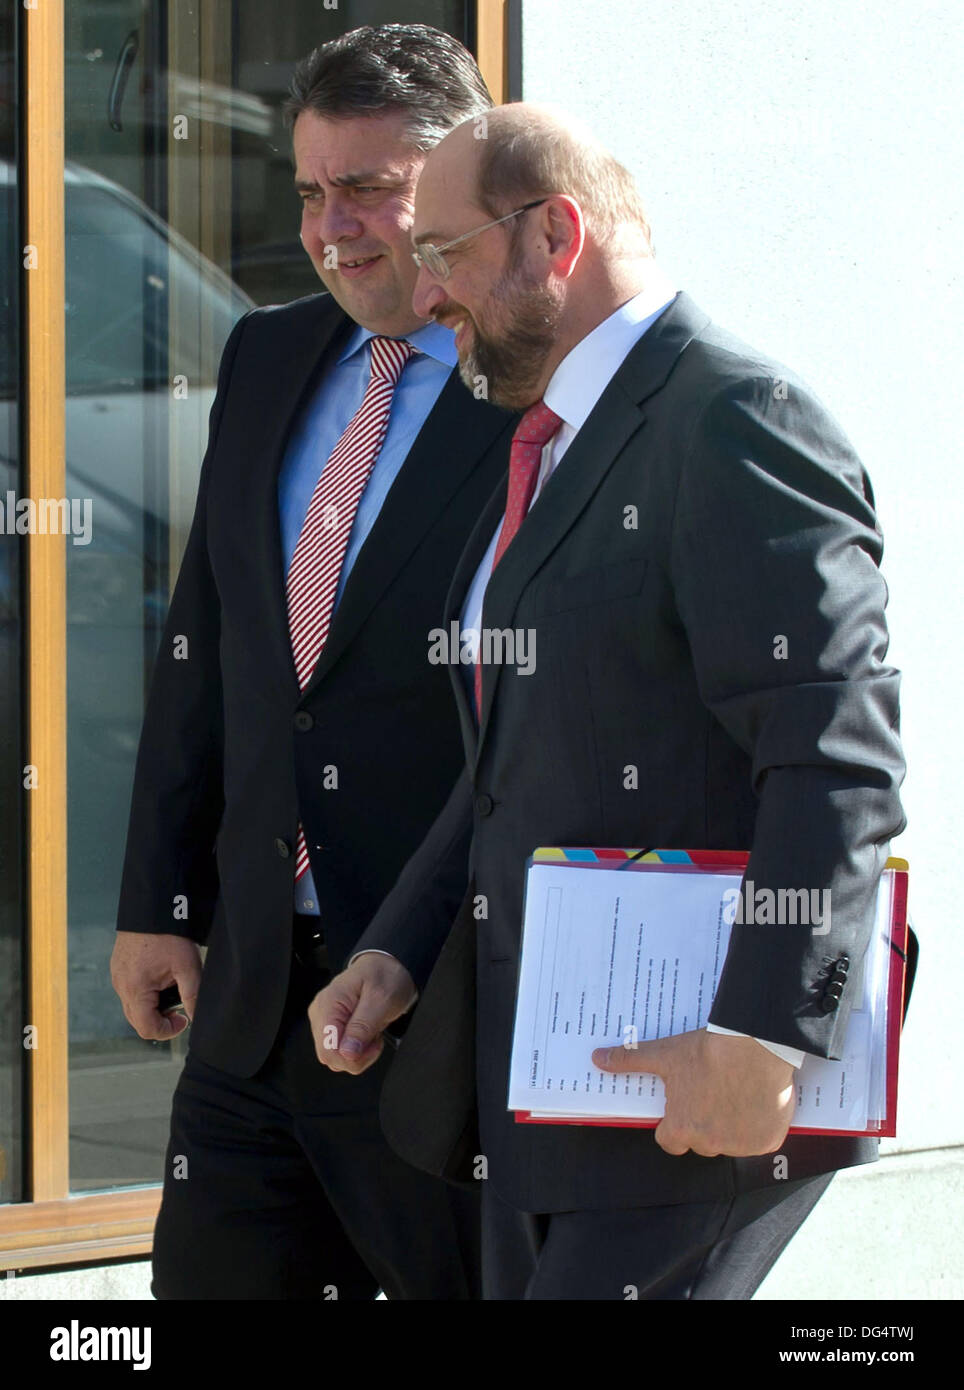 Berlin, Germany. 14th Oct, 2013. Chairman of the SPD, Sigmar Gabriel (L), and President of the European Parliament Martin Schulz (SPD) arrive at the Bundestag for exploratory coalition talks between the SPD and the CDU/CSU in Berlin, Germany, 14 October 2013. Photo: TIM BRAKEMEIER/dpa/Alamy Live News Stock Photo